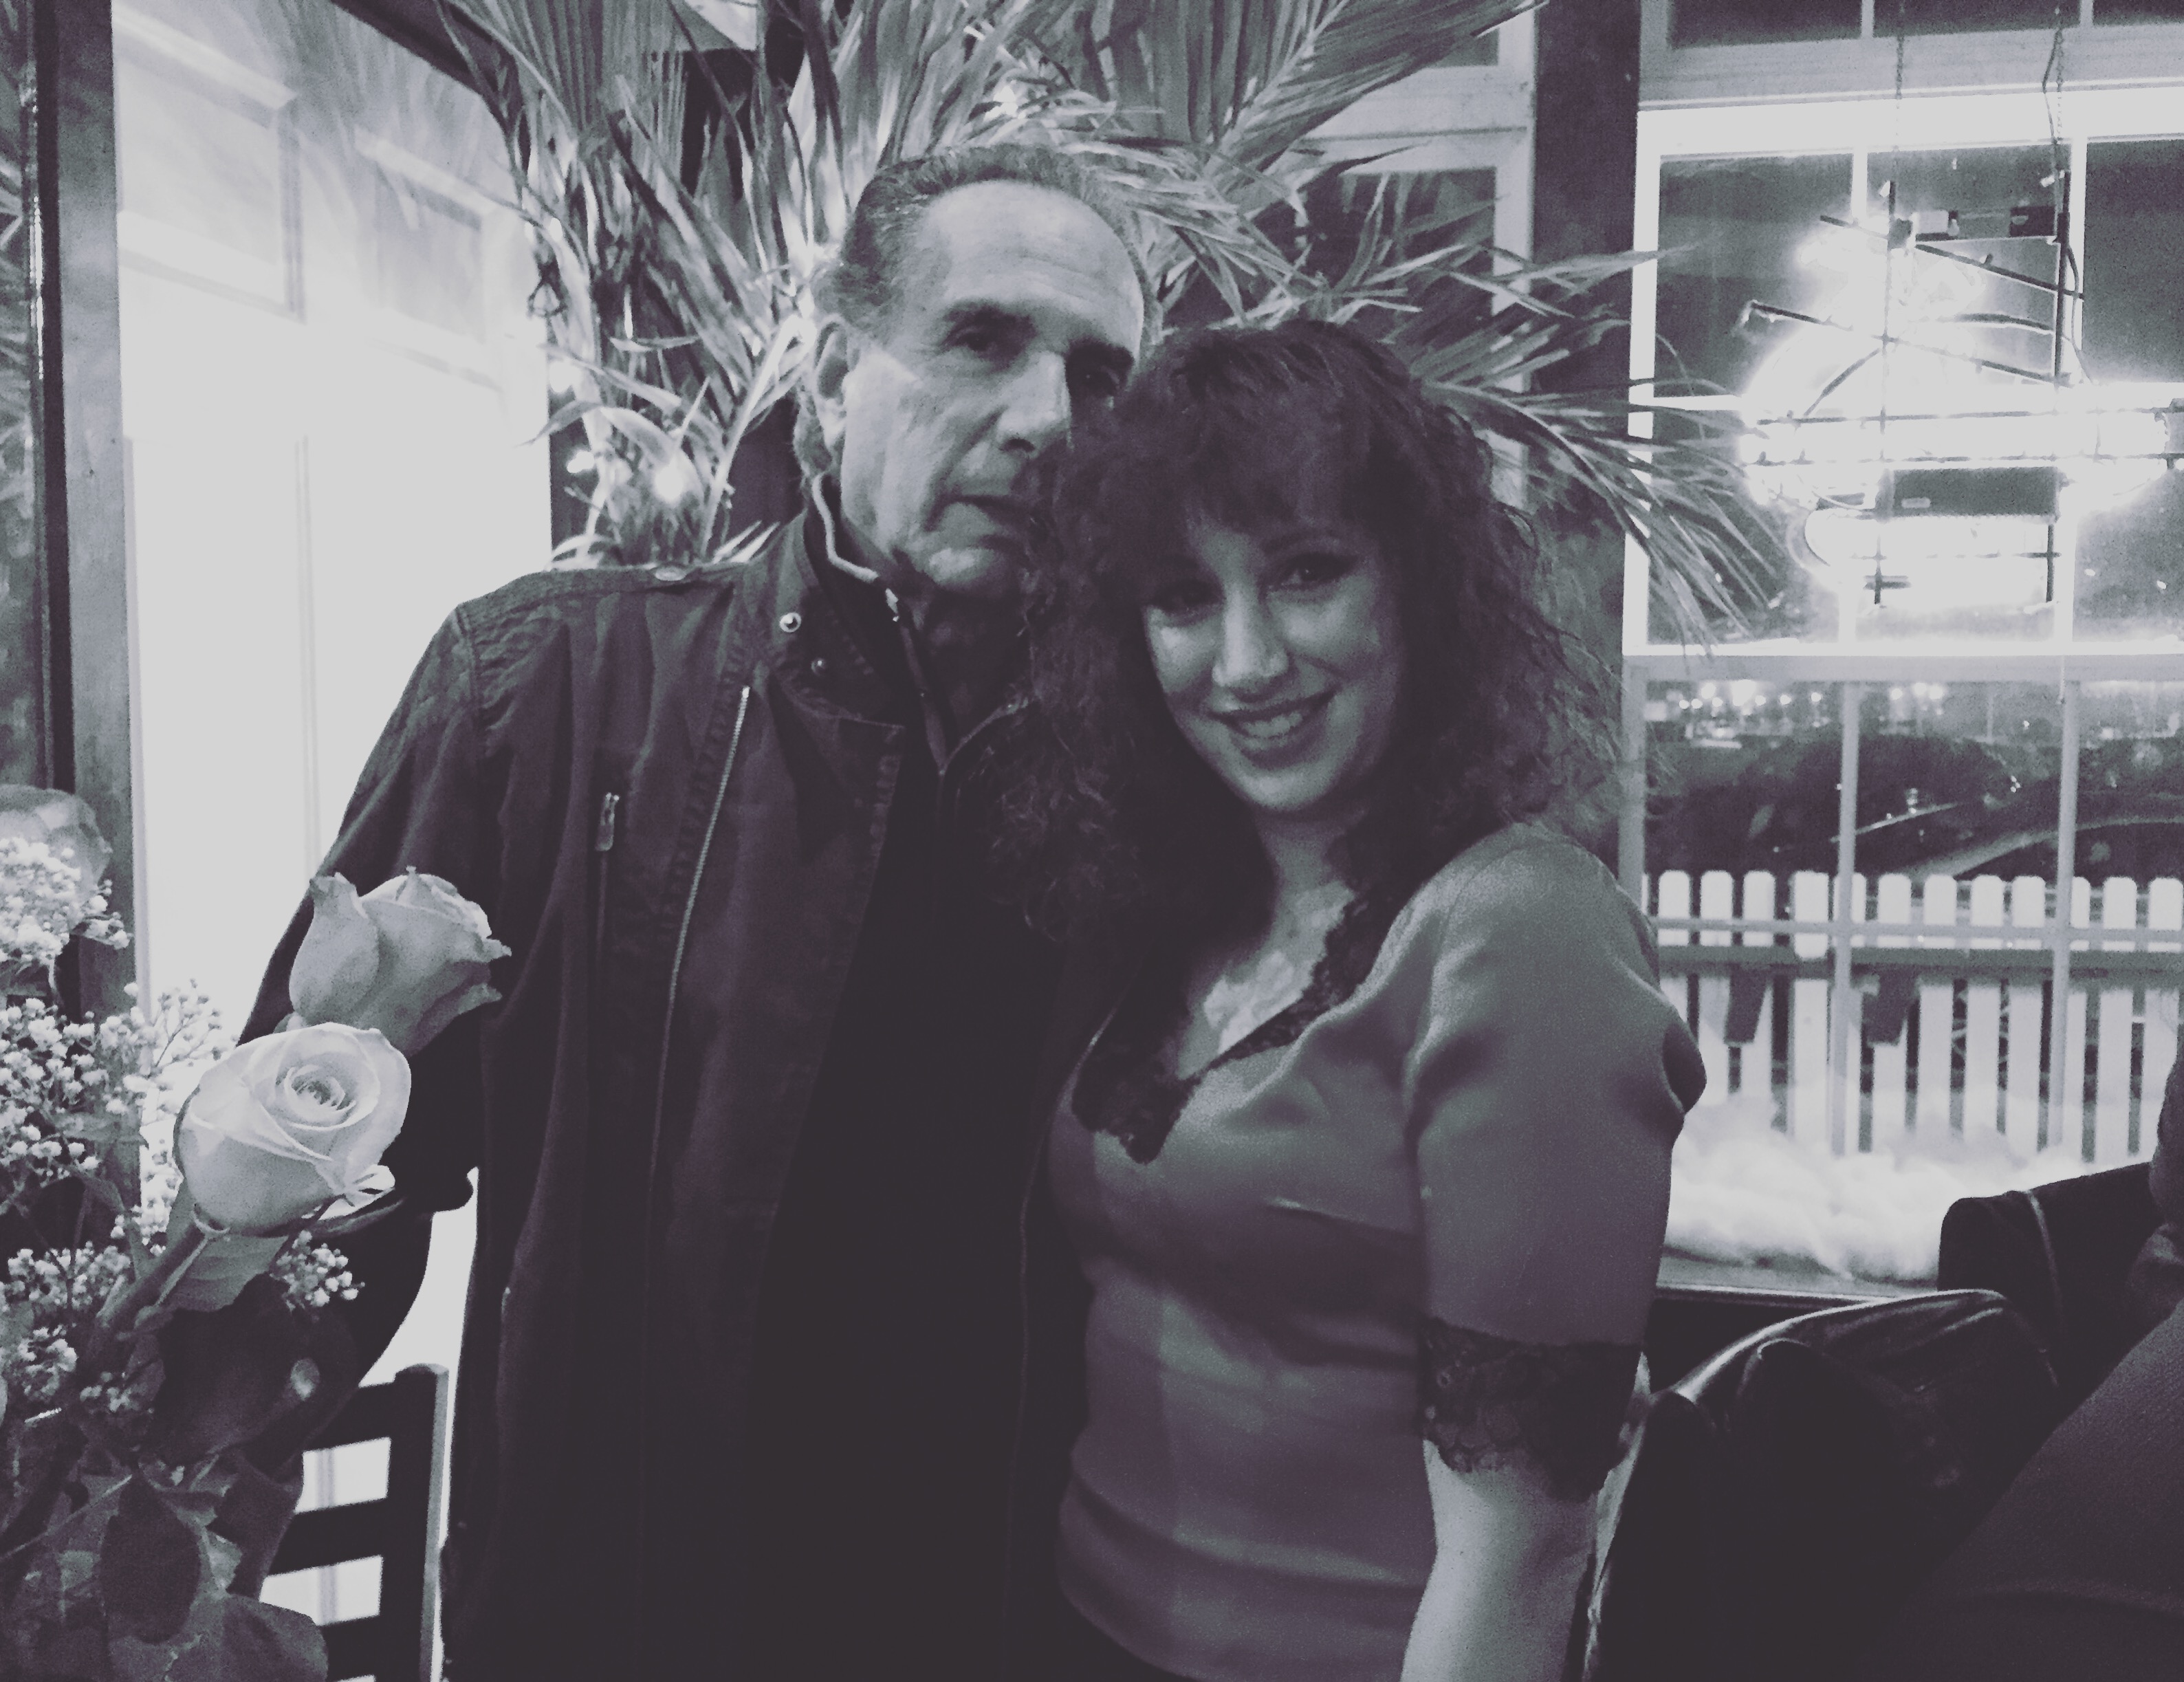 Artie Pasquale of The Sopranos with Laura Madsen at The Wonder Bar in Asbury Park, New Jersey